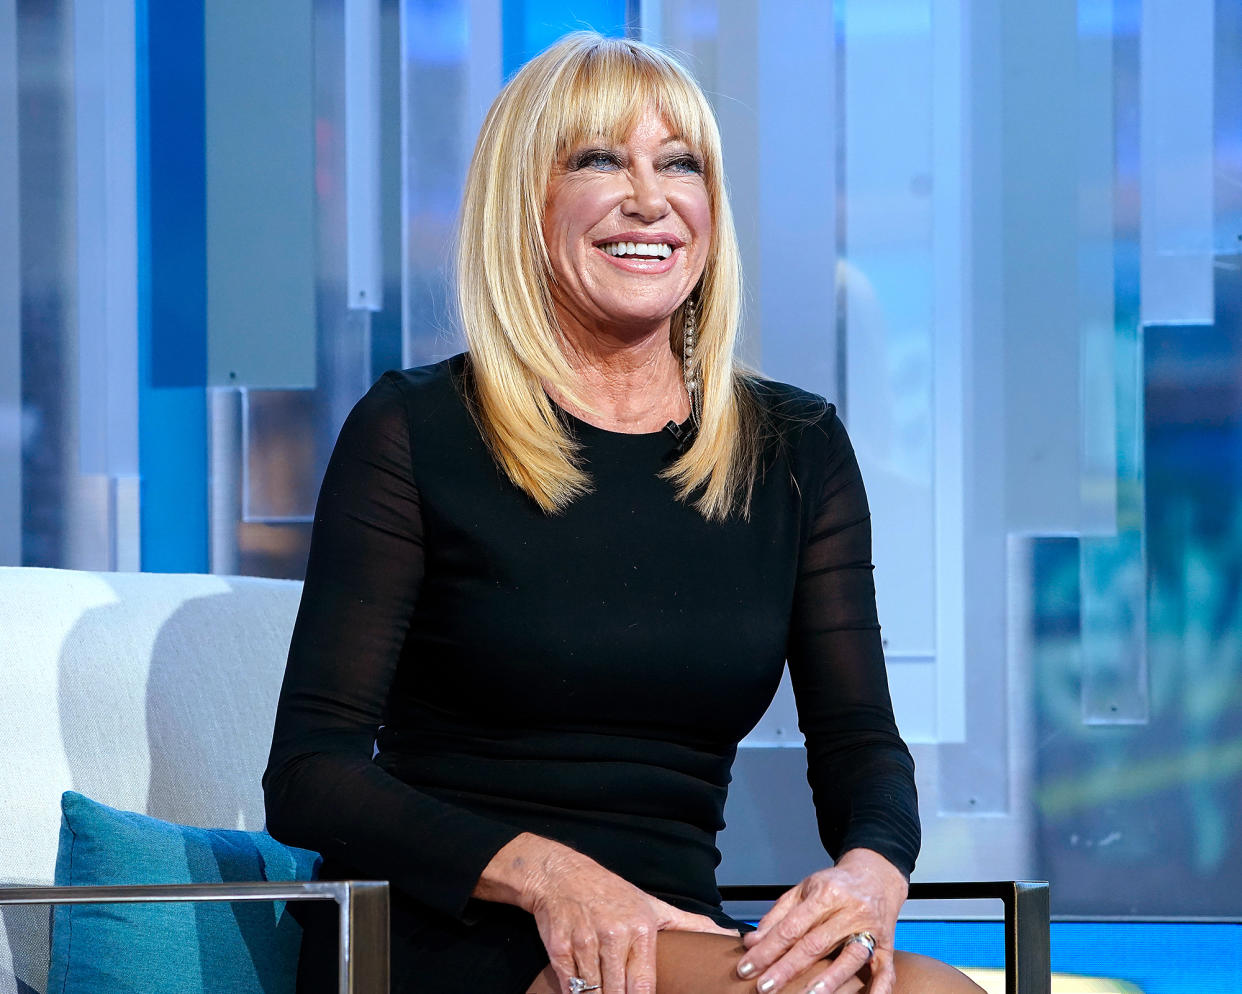 Suzanne Somers’ Family Celebrates Her Birthday 1 Day After Death: 'Her Legacy of Love Lives On in All of You'